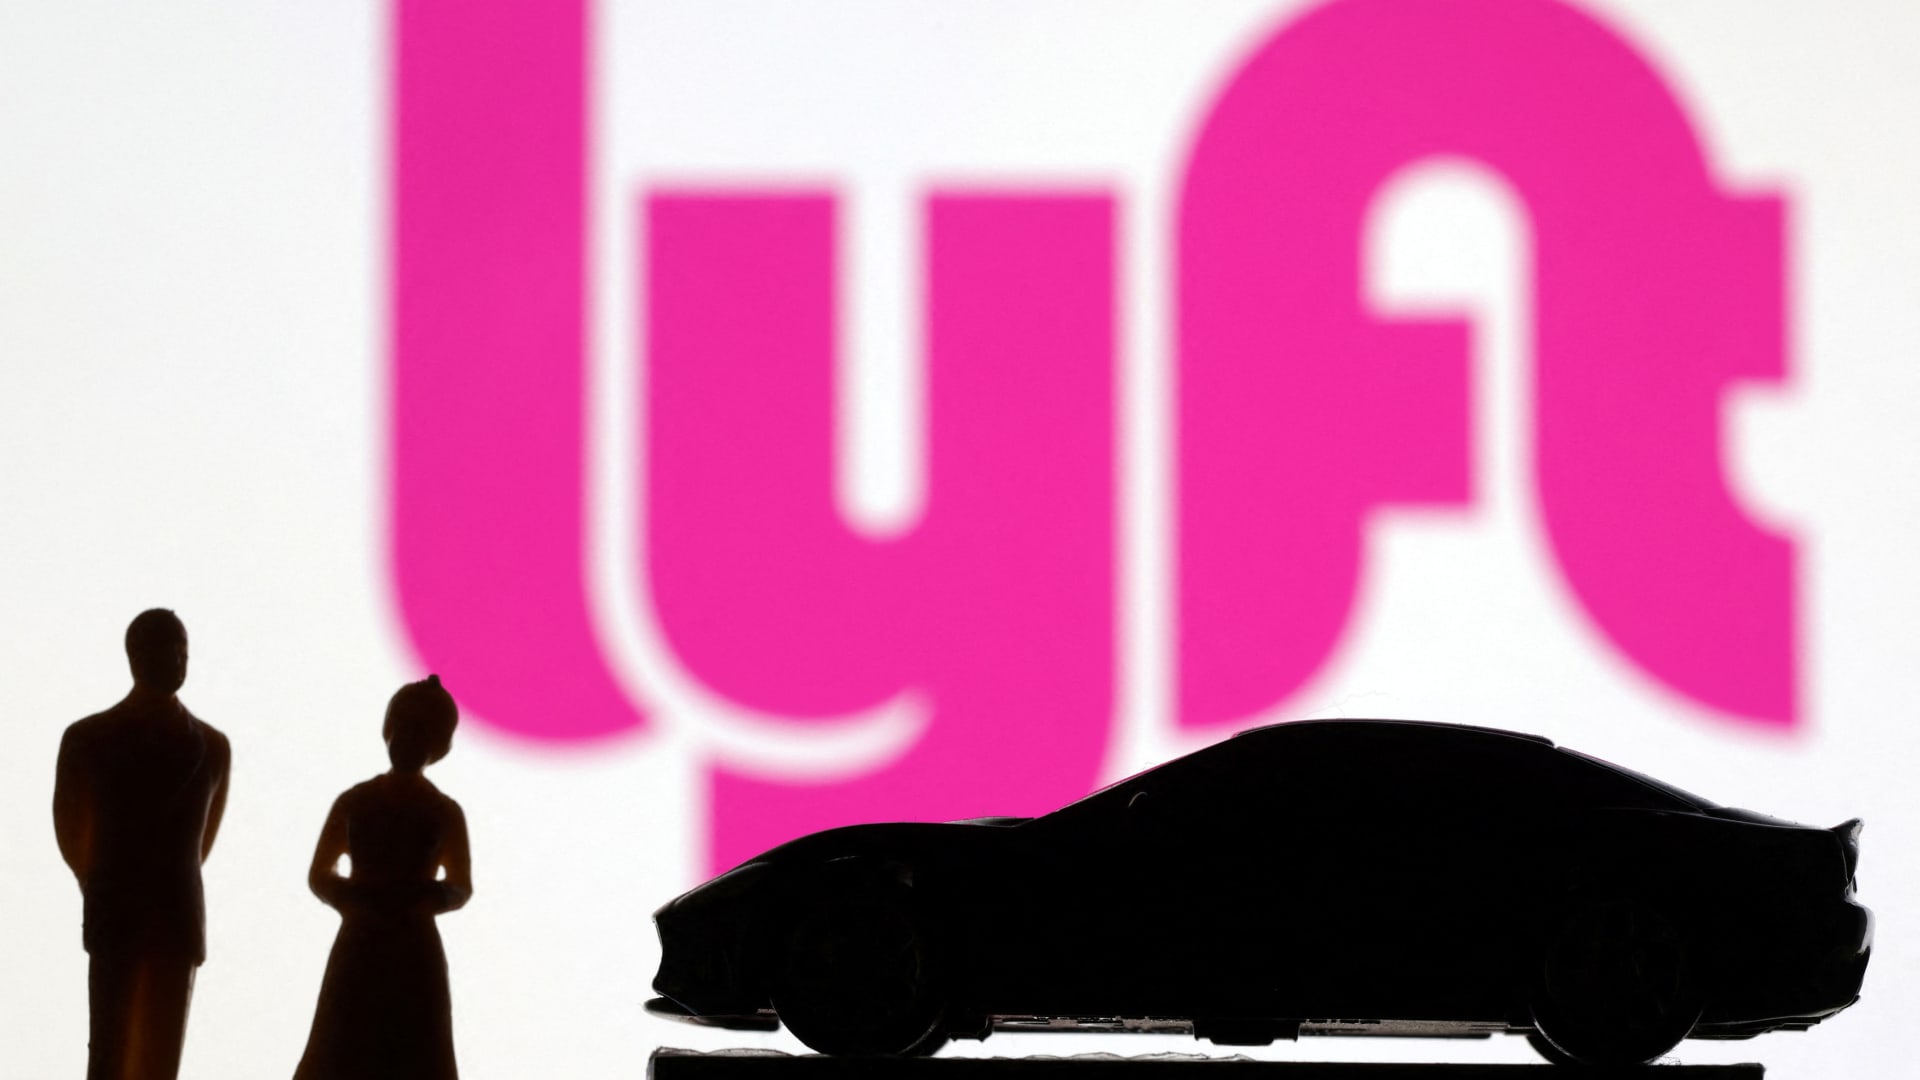 Lyft CEO takes blame for ‘extra zero that slipped into’ earnings release